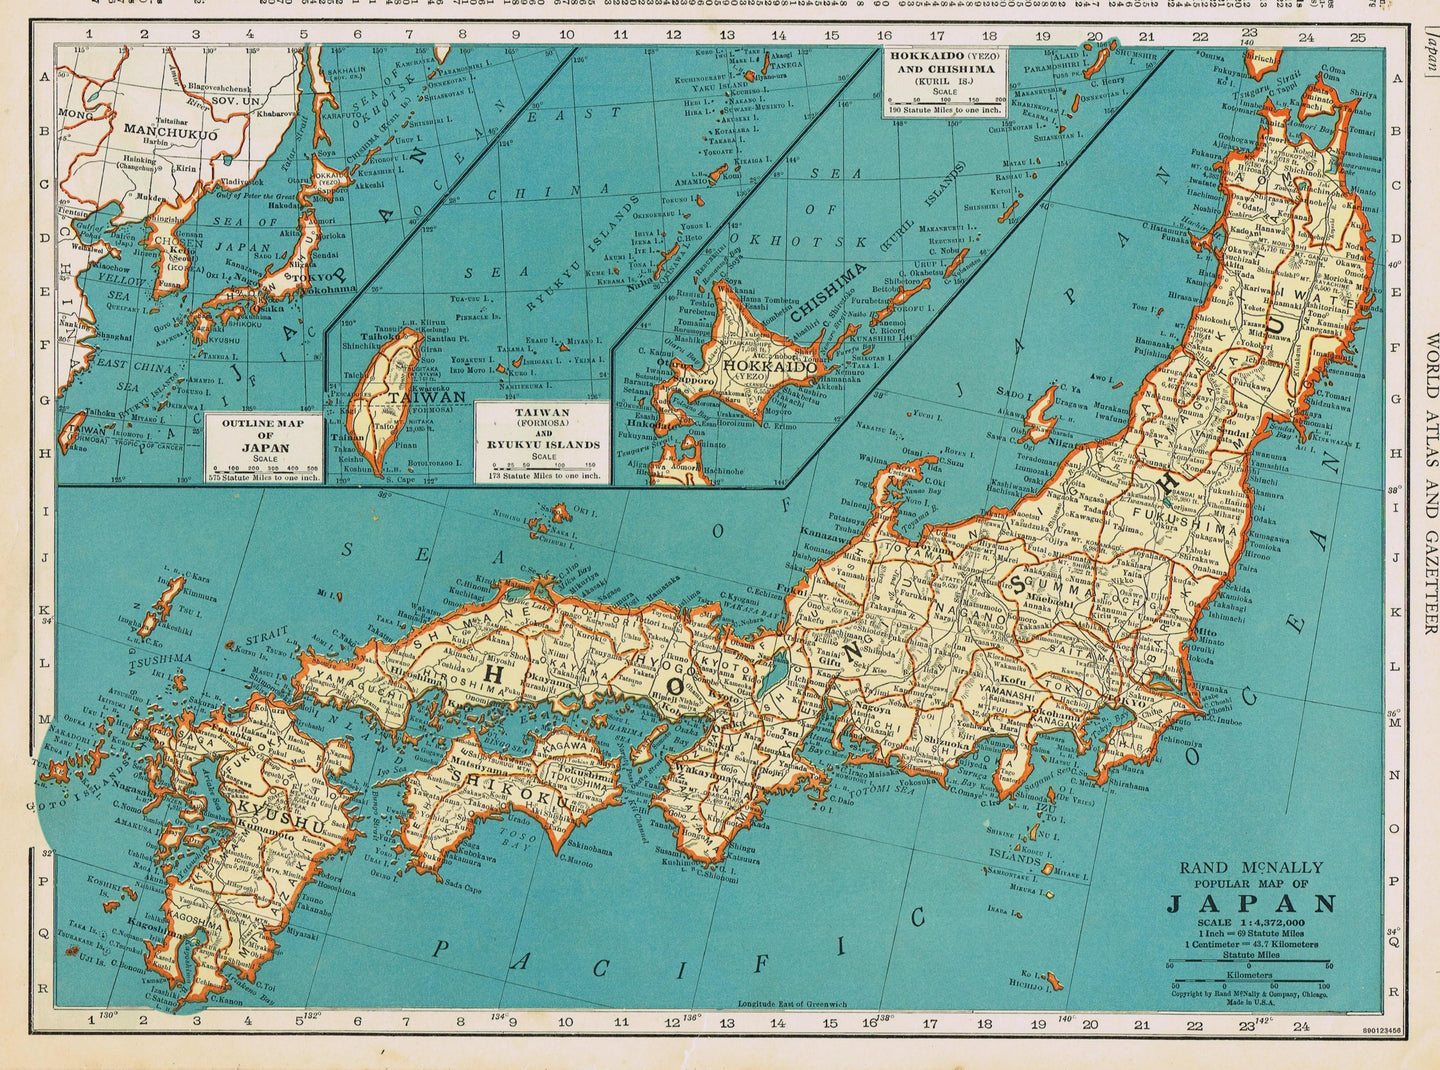 Genuine-Antique-Map-Popular-Map-of-Japan-1940-Rand-McNally-Maps-Of-Antiquity